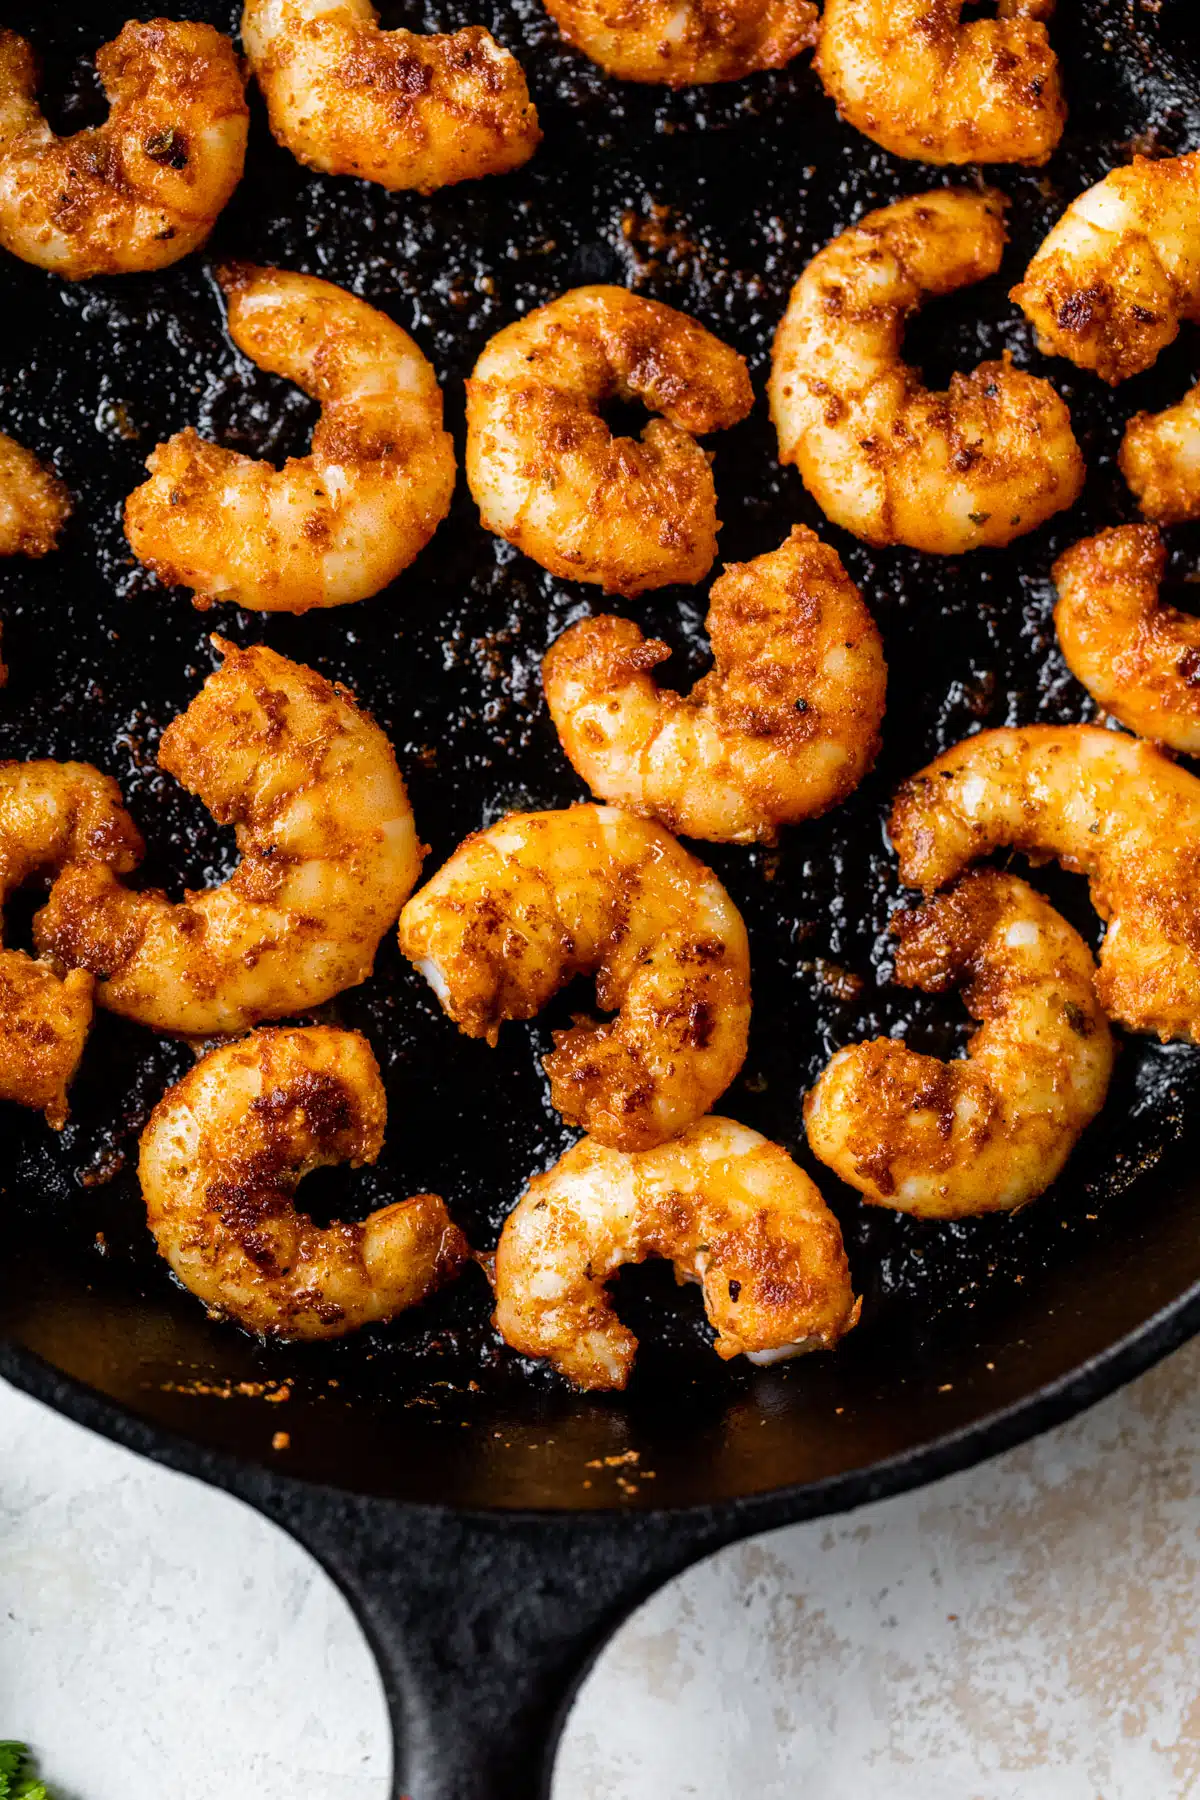 a close-up of shrimp cooking on a cast iron skillet